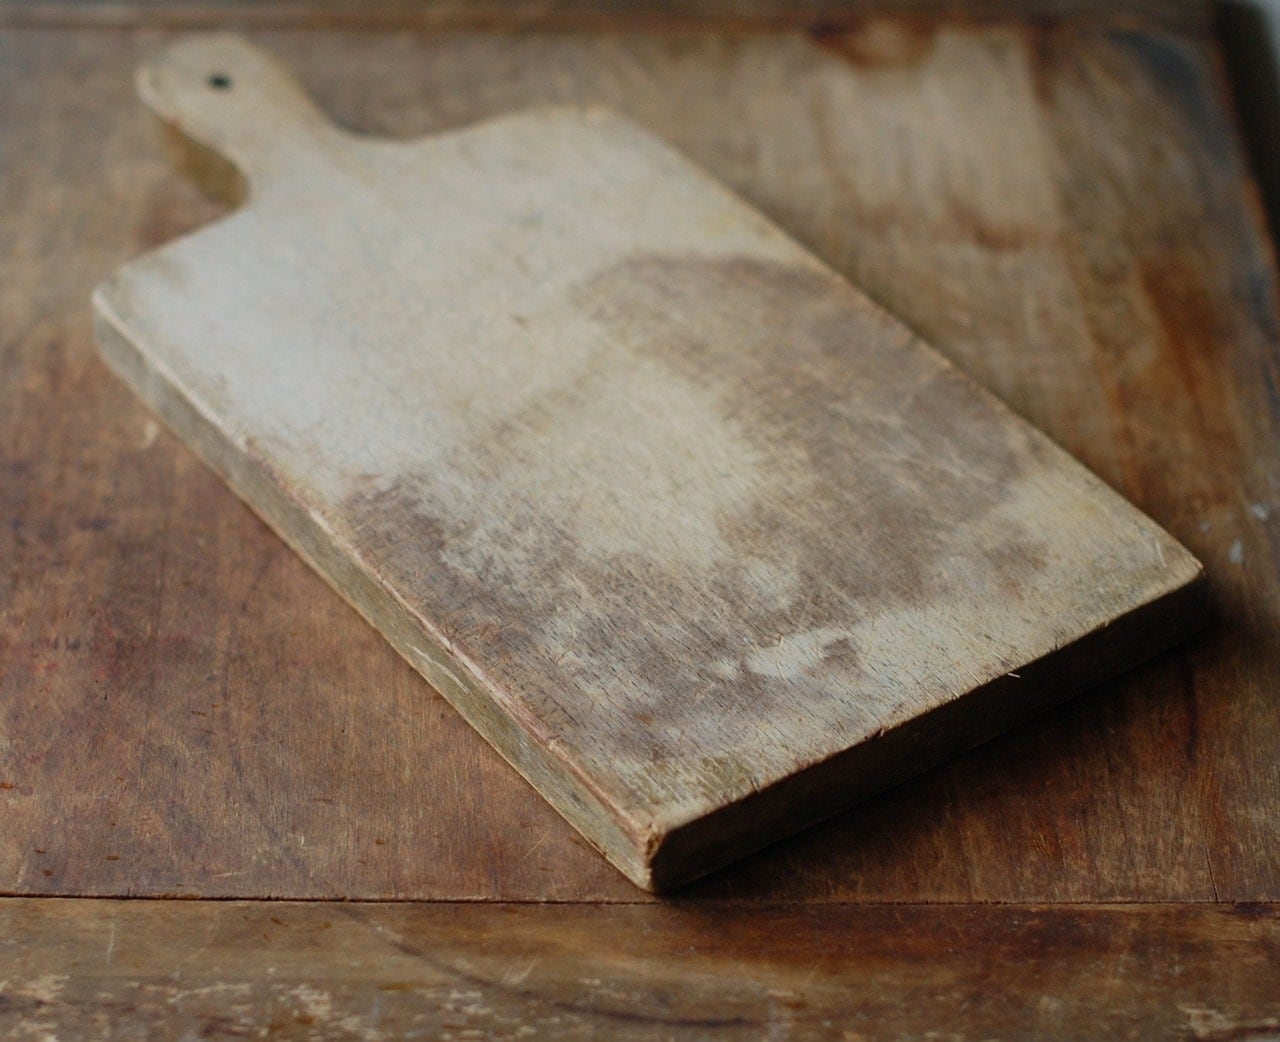 Antique Wood Cutting Board with Rustic Patina - Vintage Bread Board - FrogGoesToMarket